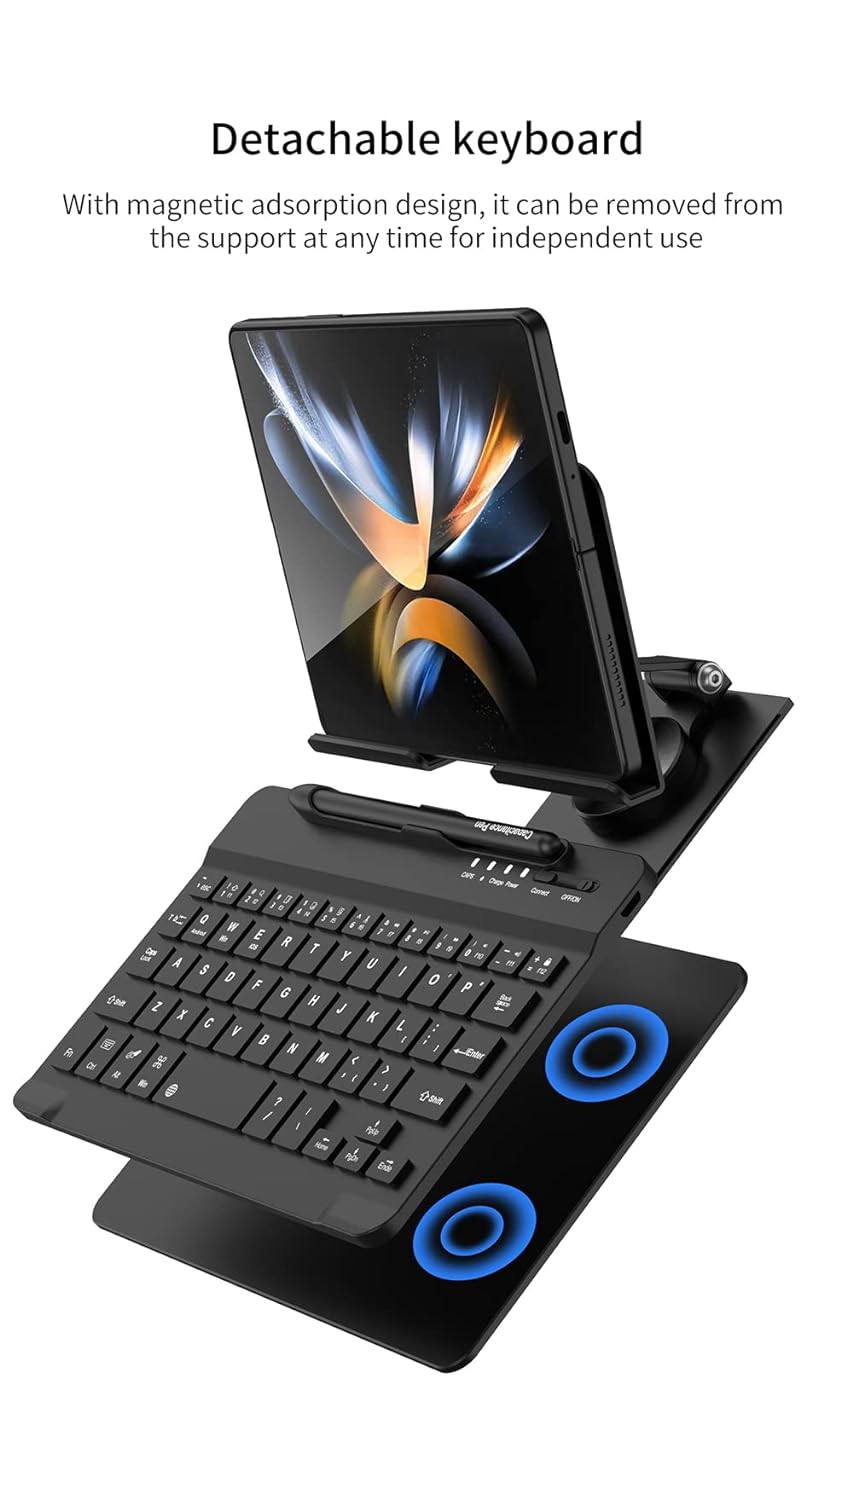 MUXQMOR Bluetooth Keyboard and Mouse for Samsung Galaxy Z Fold 4/3/2/1, Portable Magnetic Wireless Keyboard with Foldable Phone Stand & Pen Holder